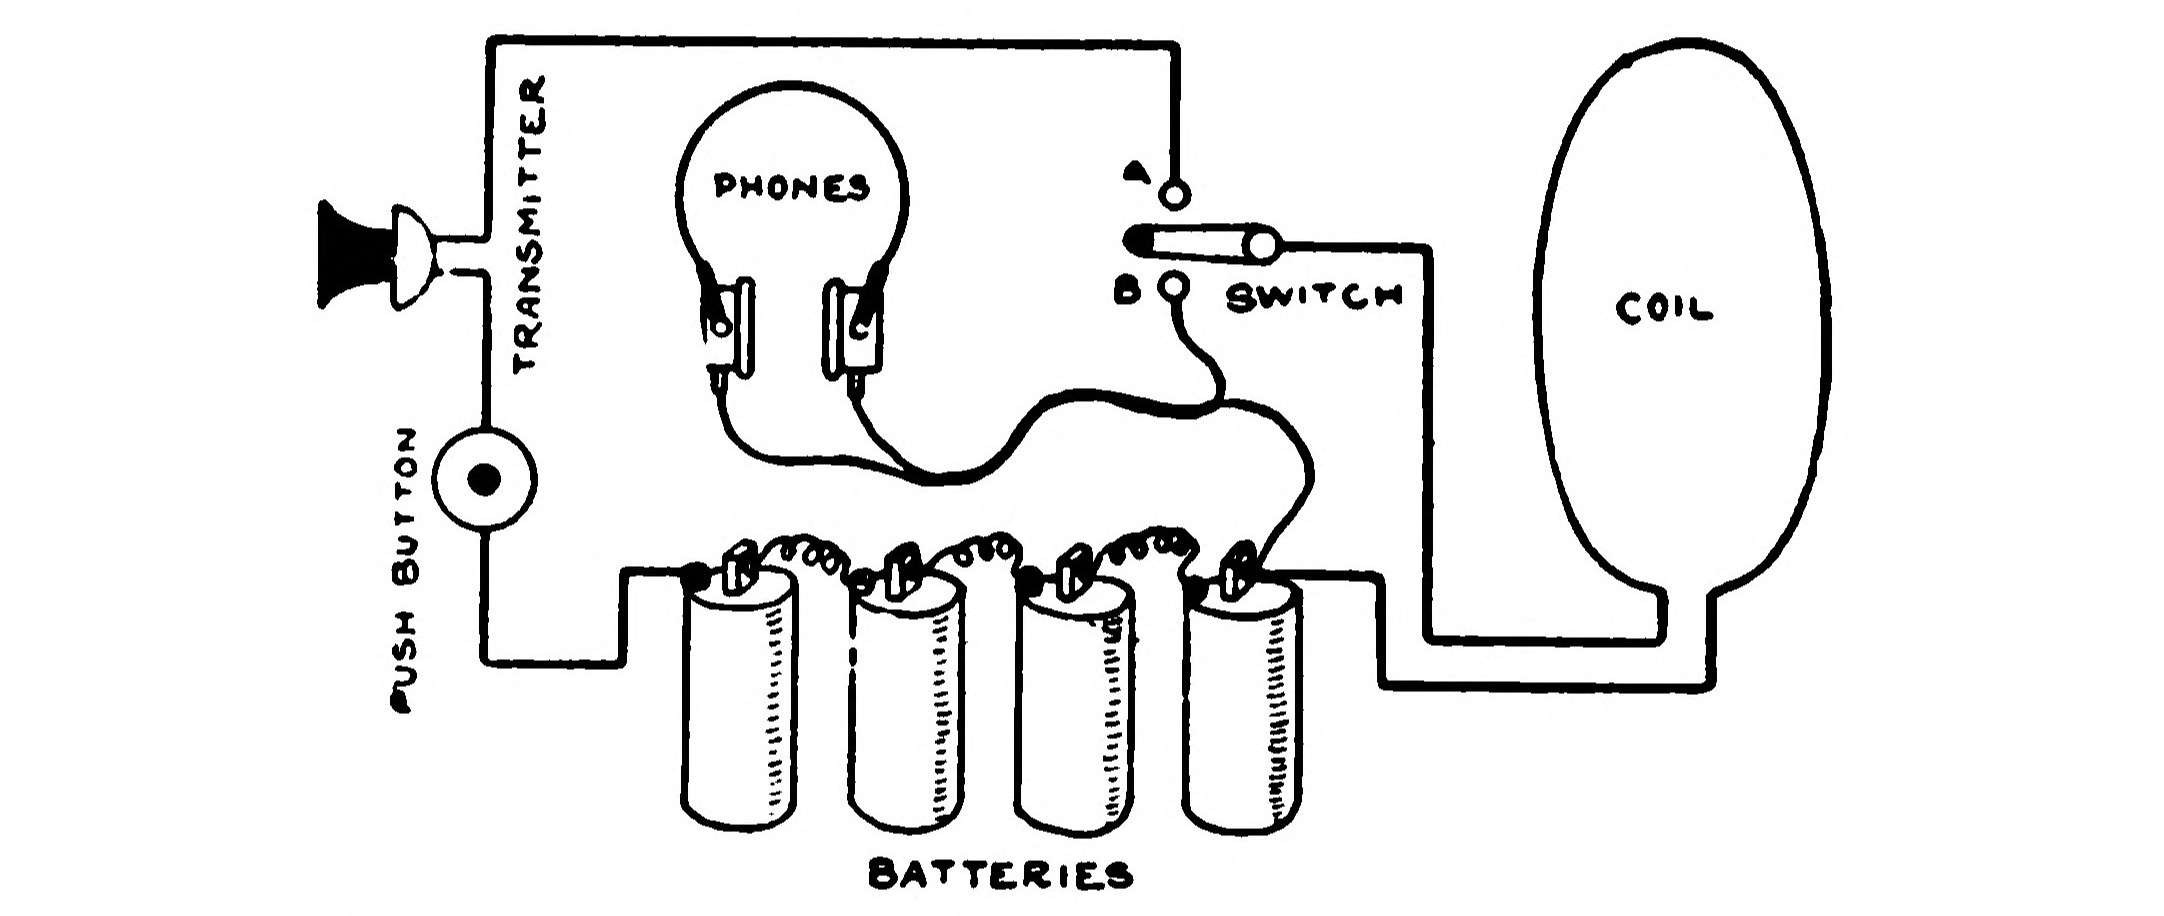 FIG. 184.—Circuit Diagram showing how the Coil is connected so as to serve for either transmitting or receiving.